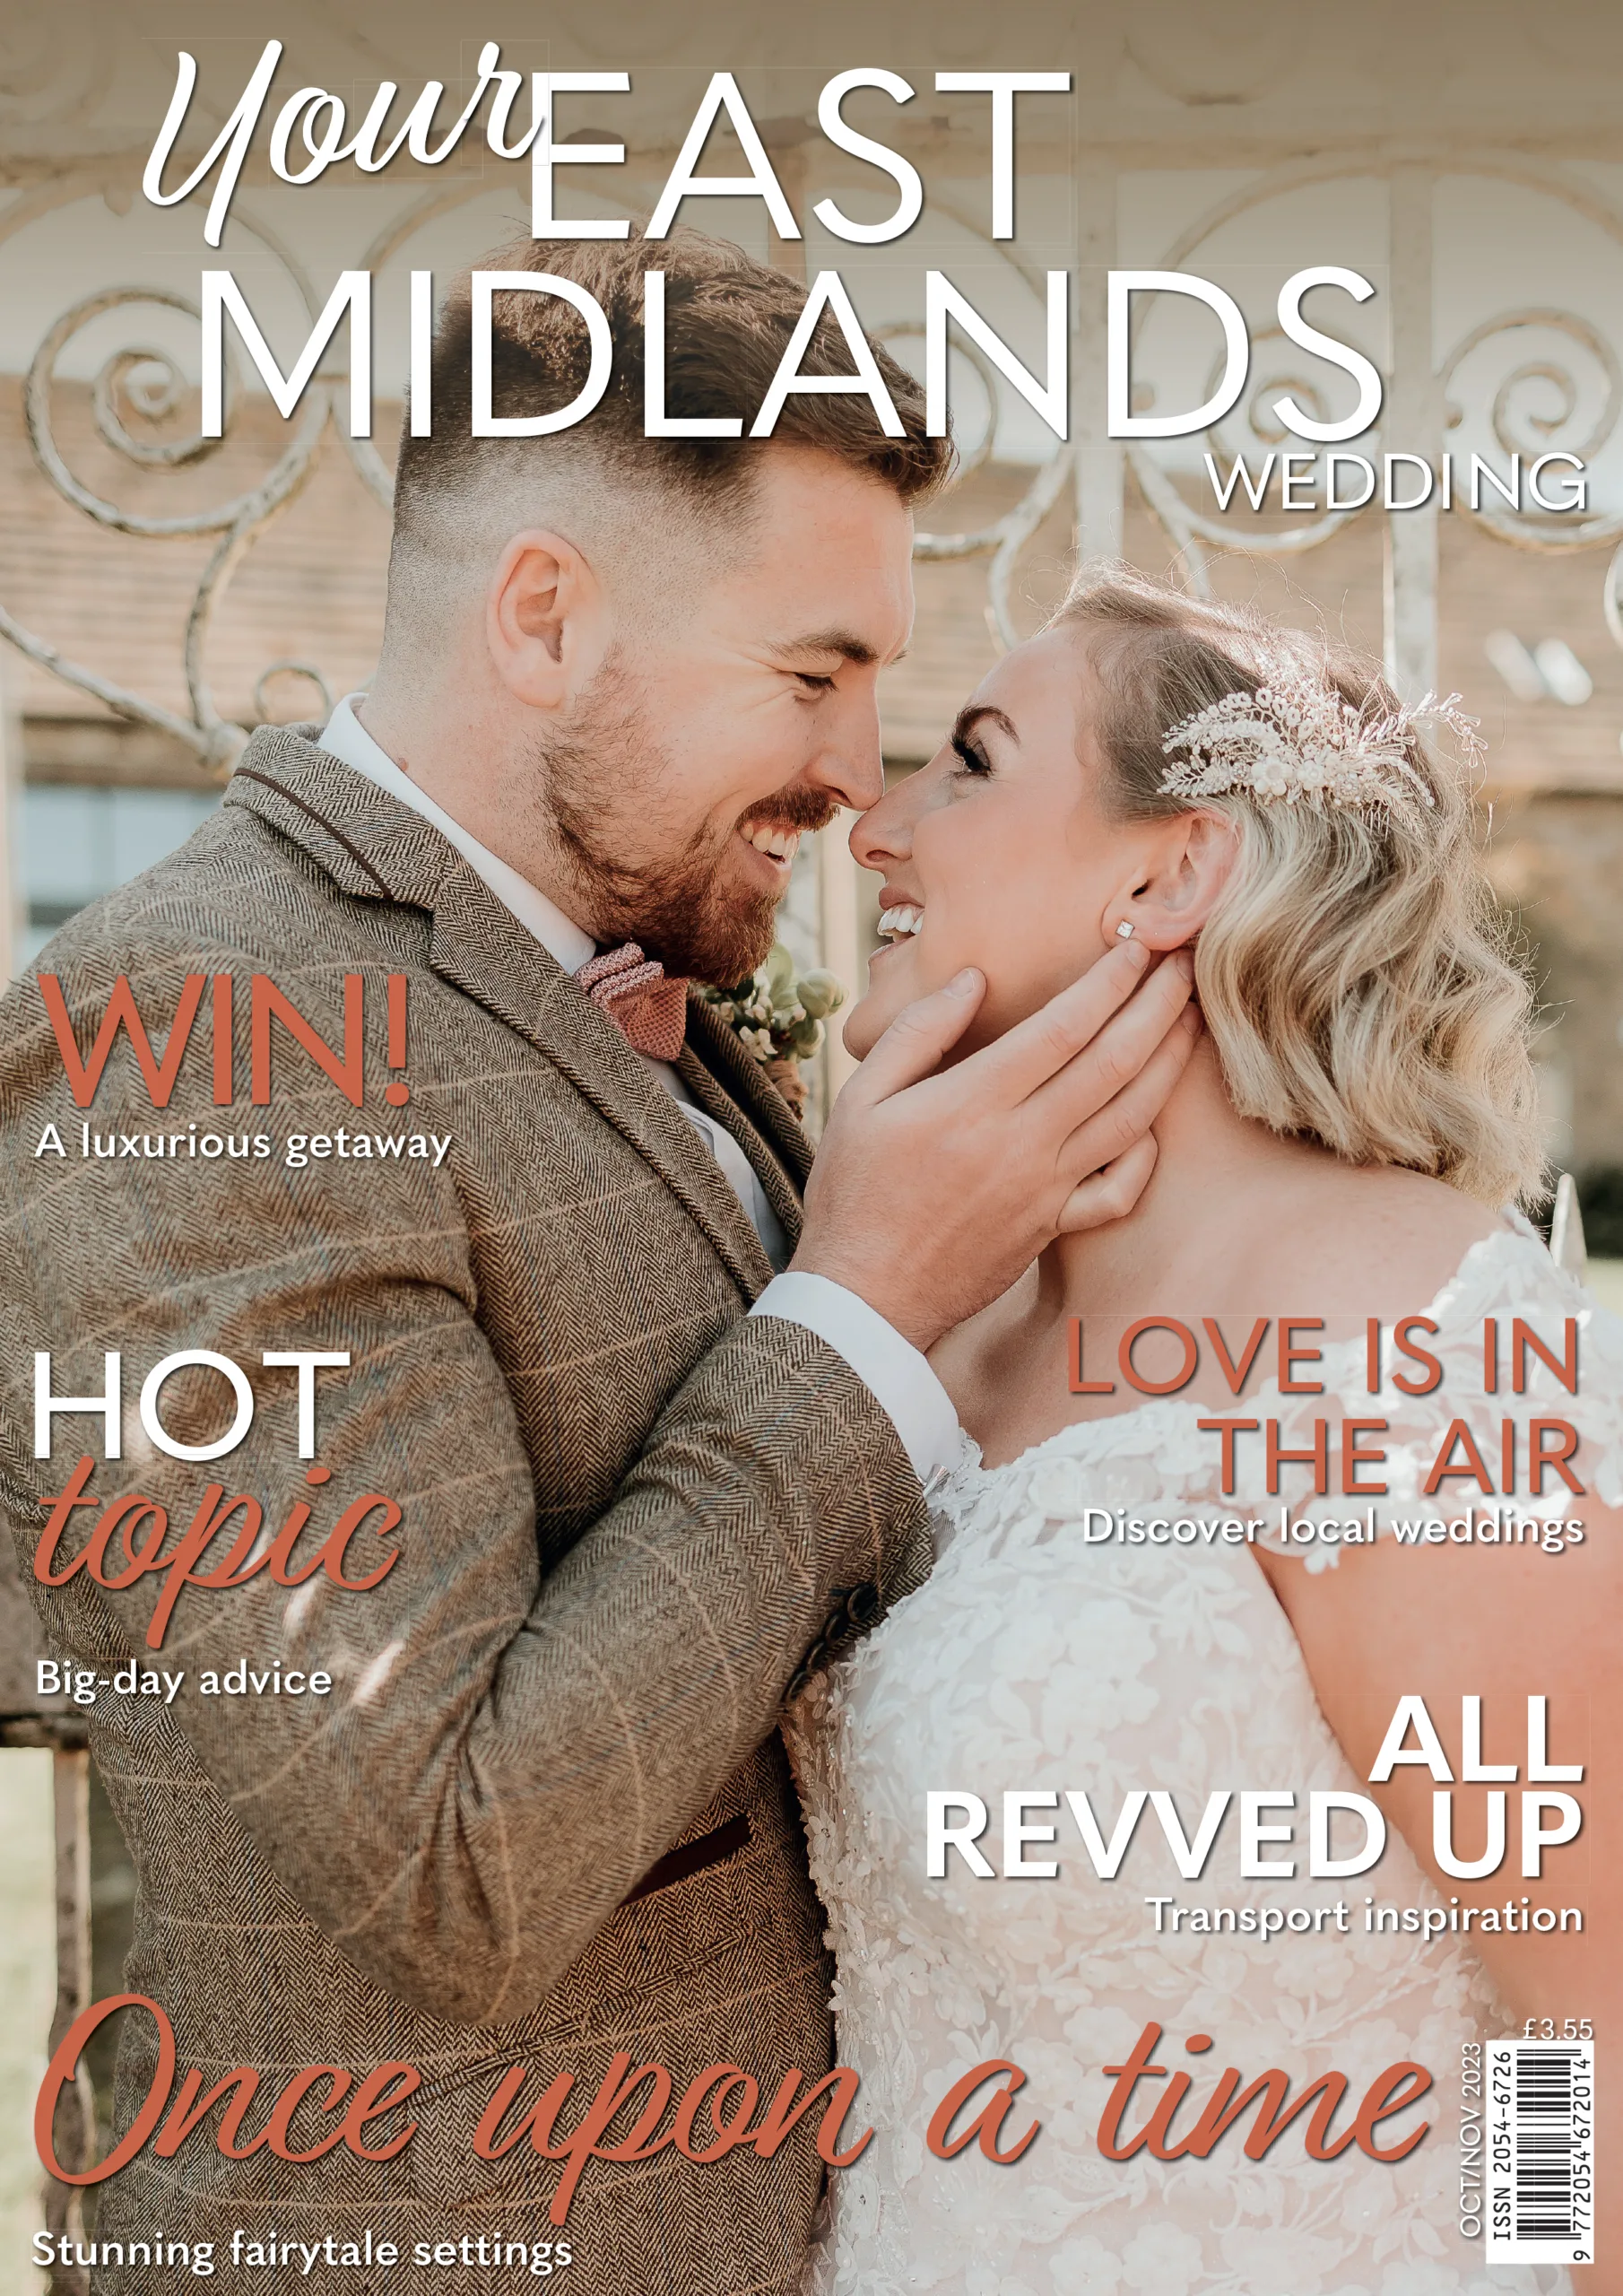 The wedding cover of your East Midlands magazine.